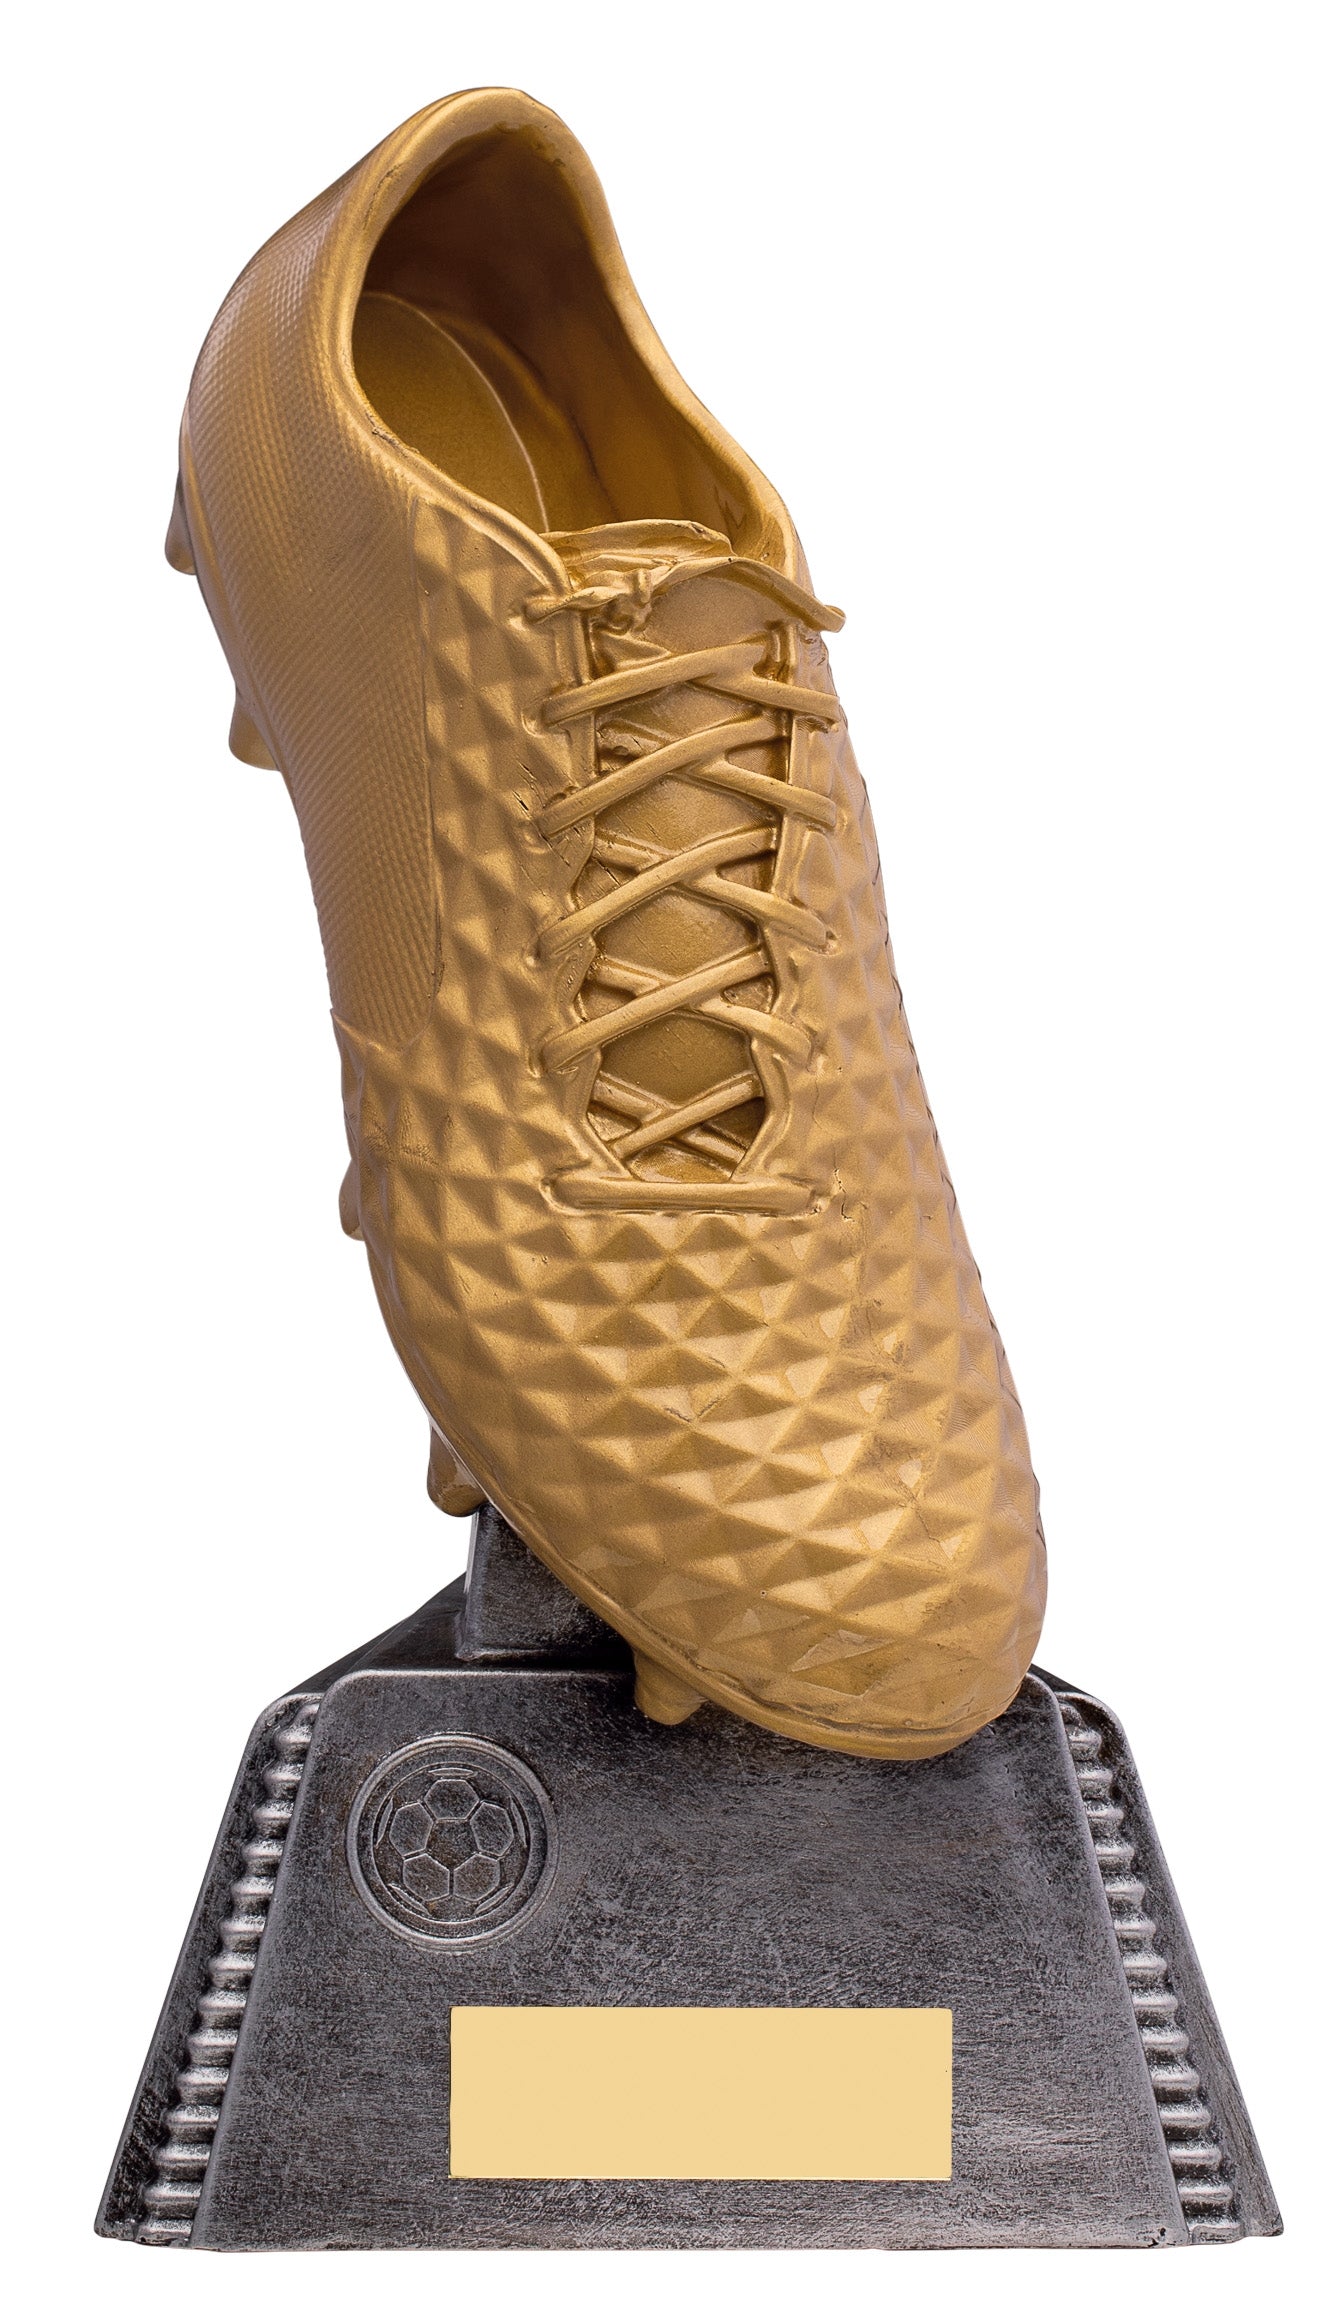 Apex Golden Boot Football Trophy on Engraved Silver Base